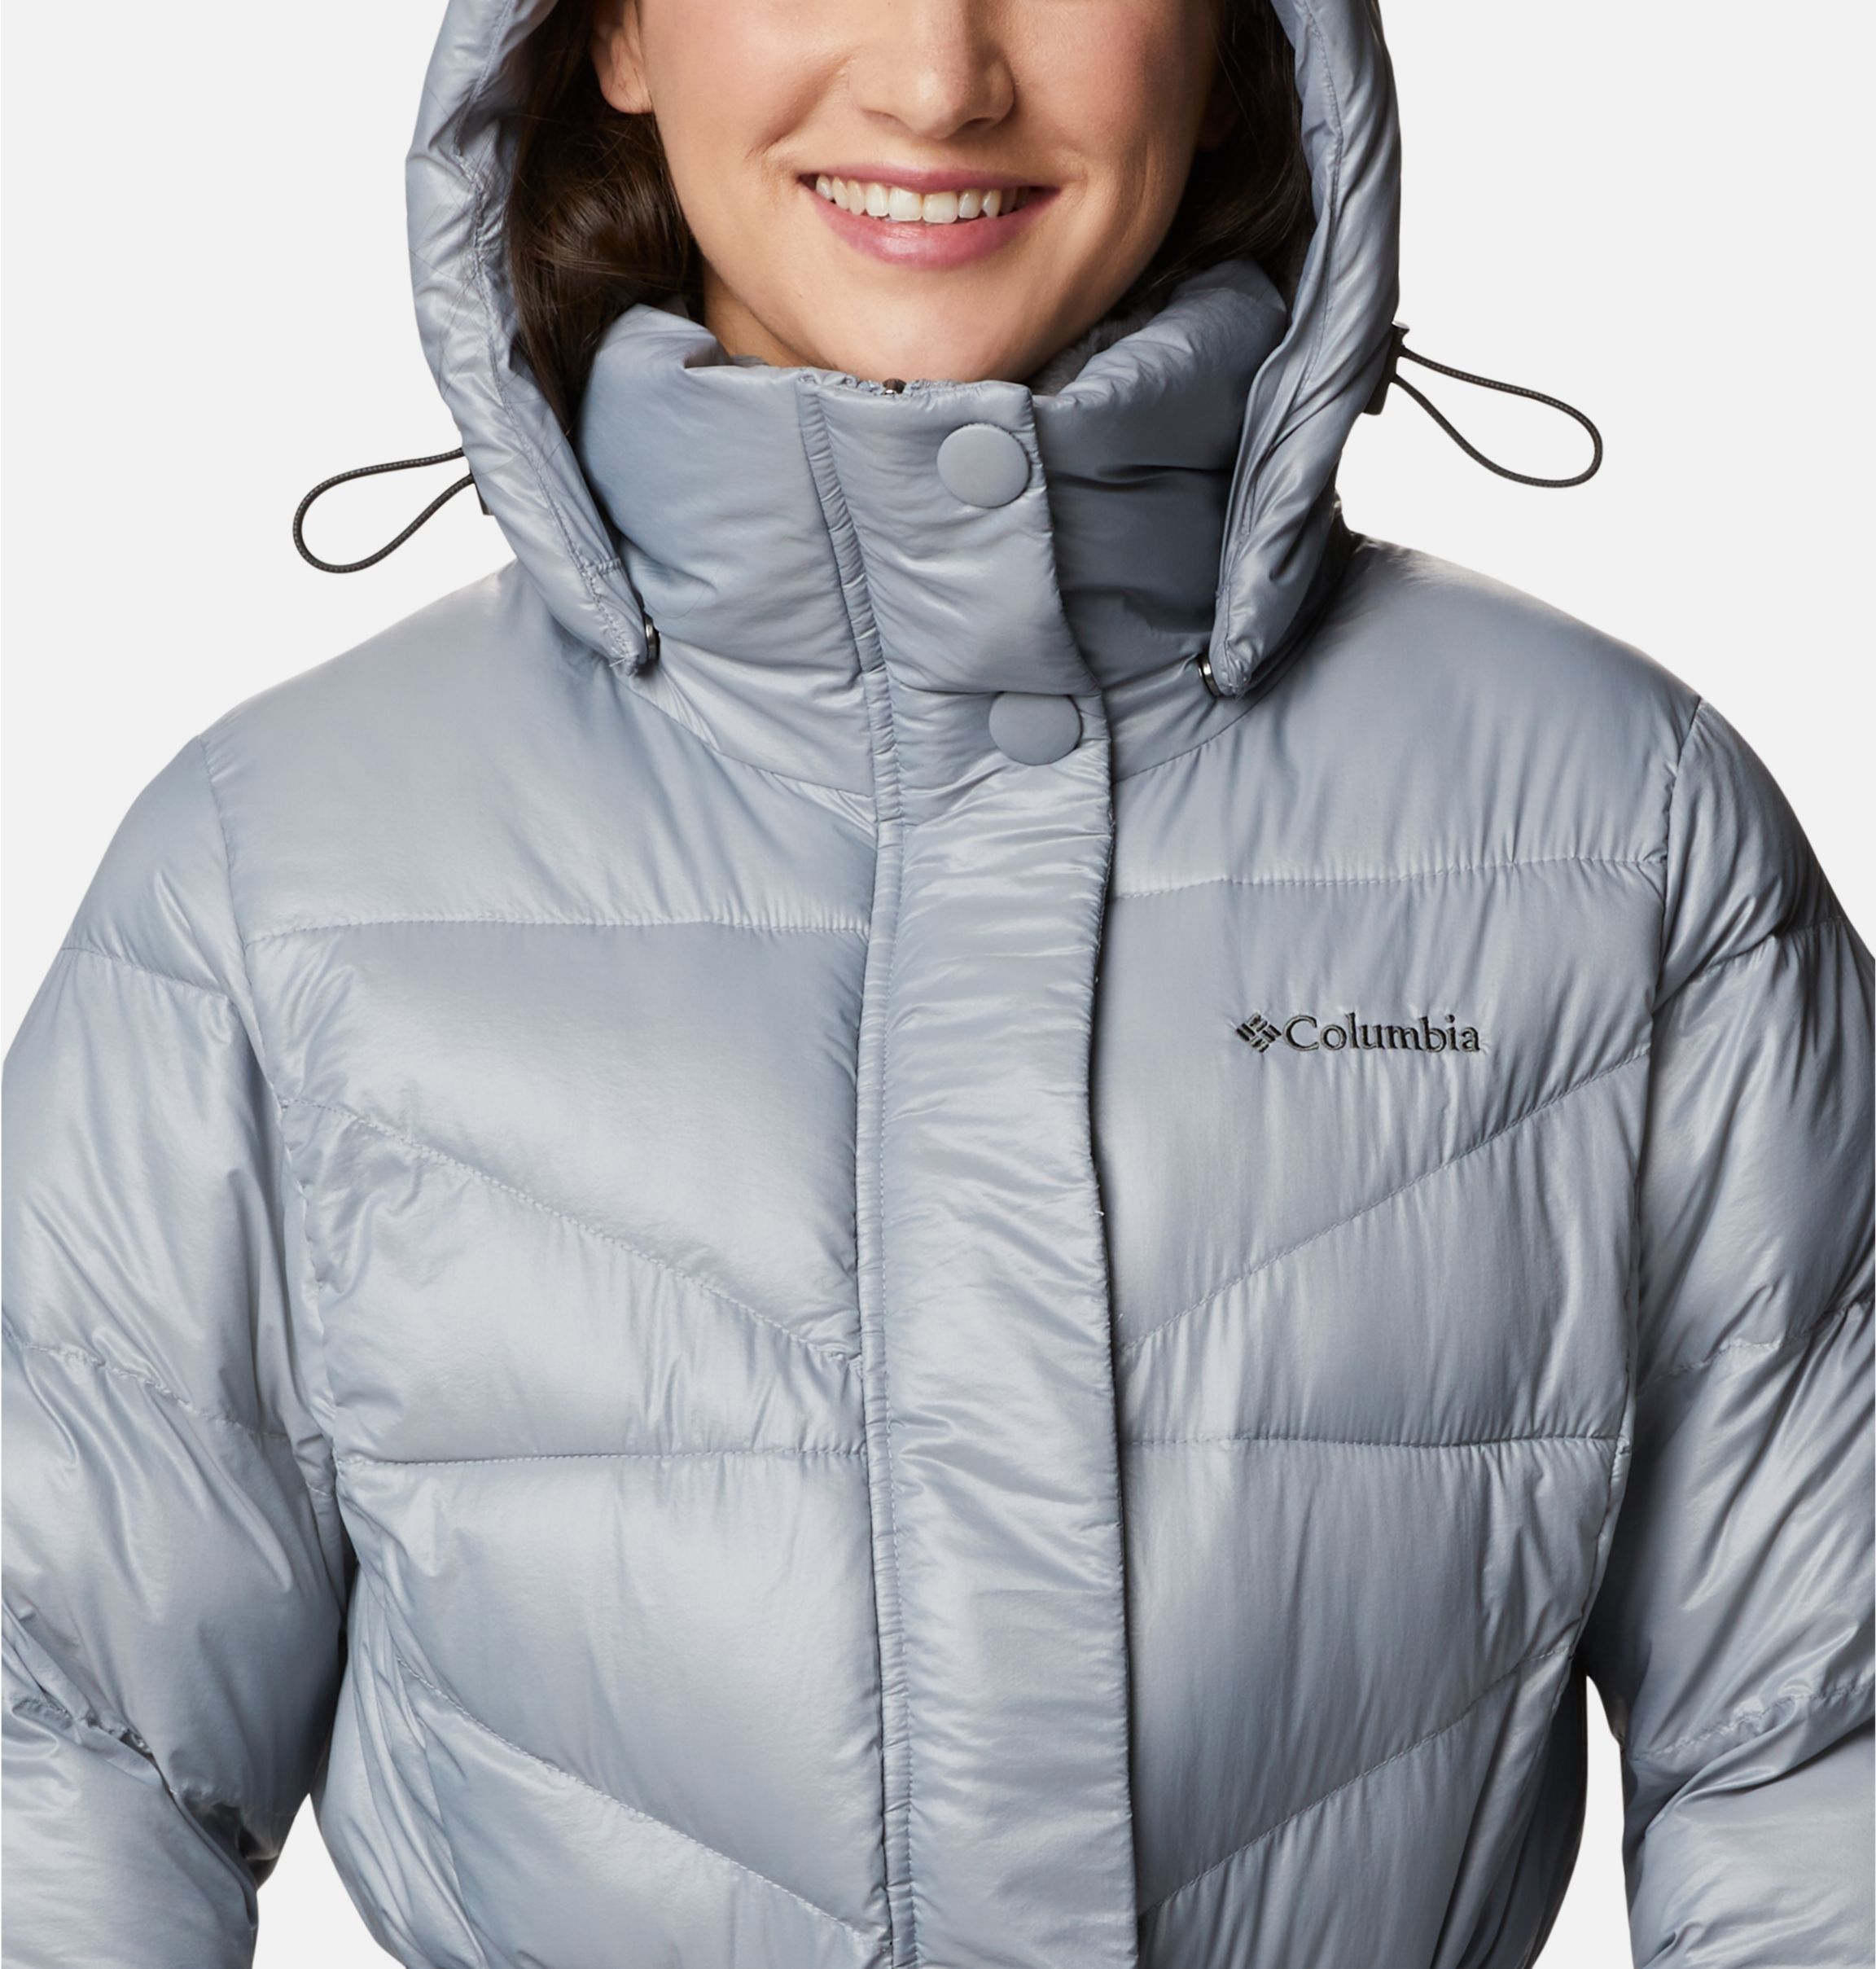 AWS Insulated Parka - United Join Forces